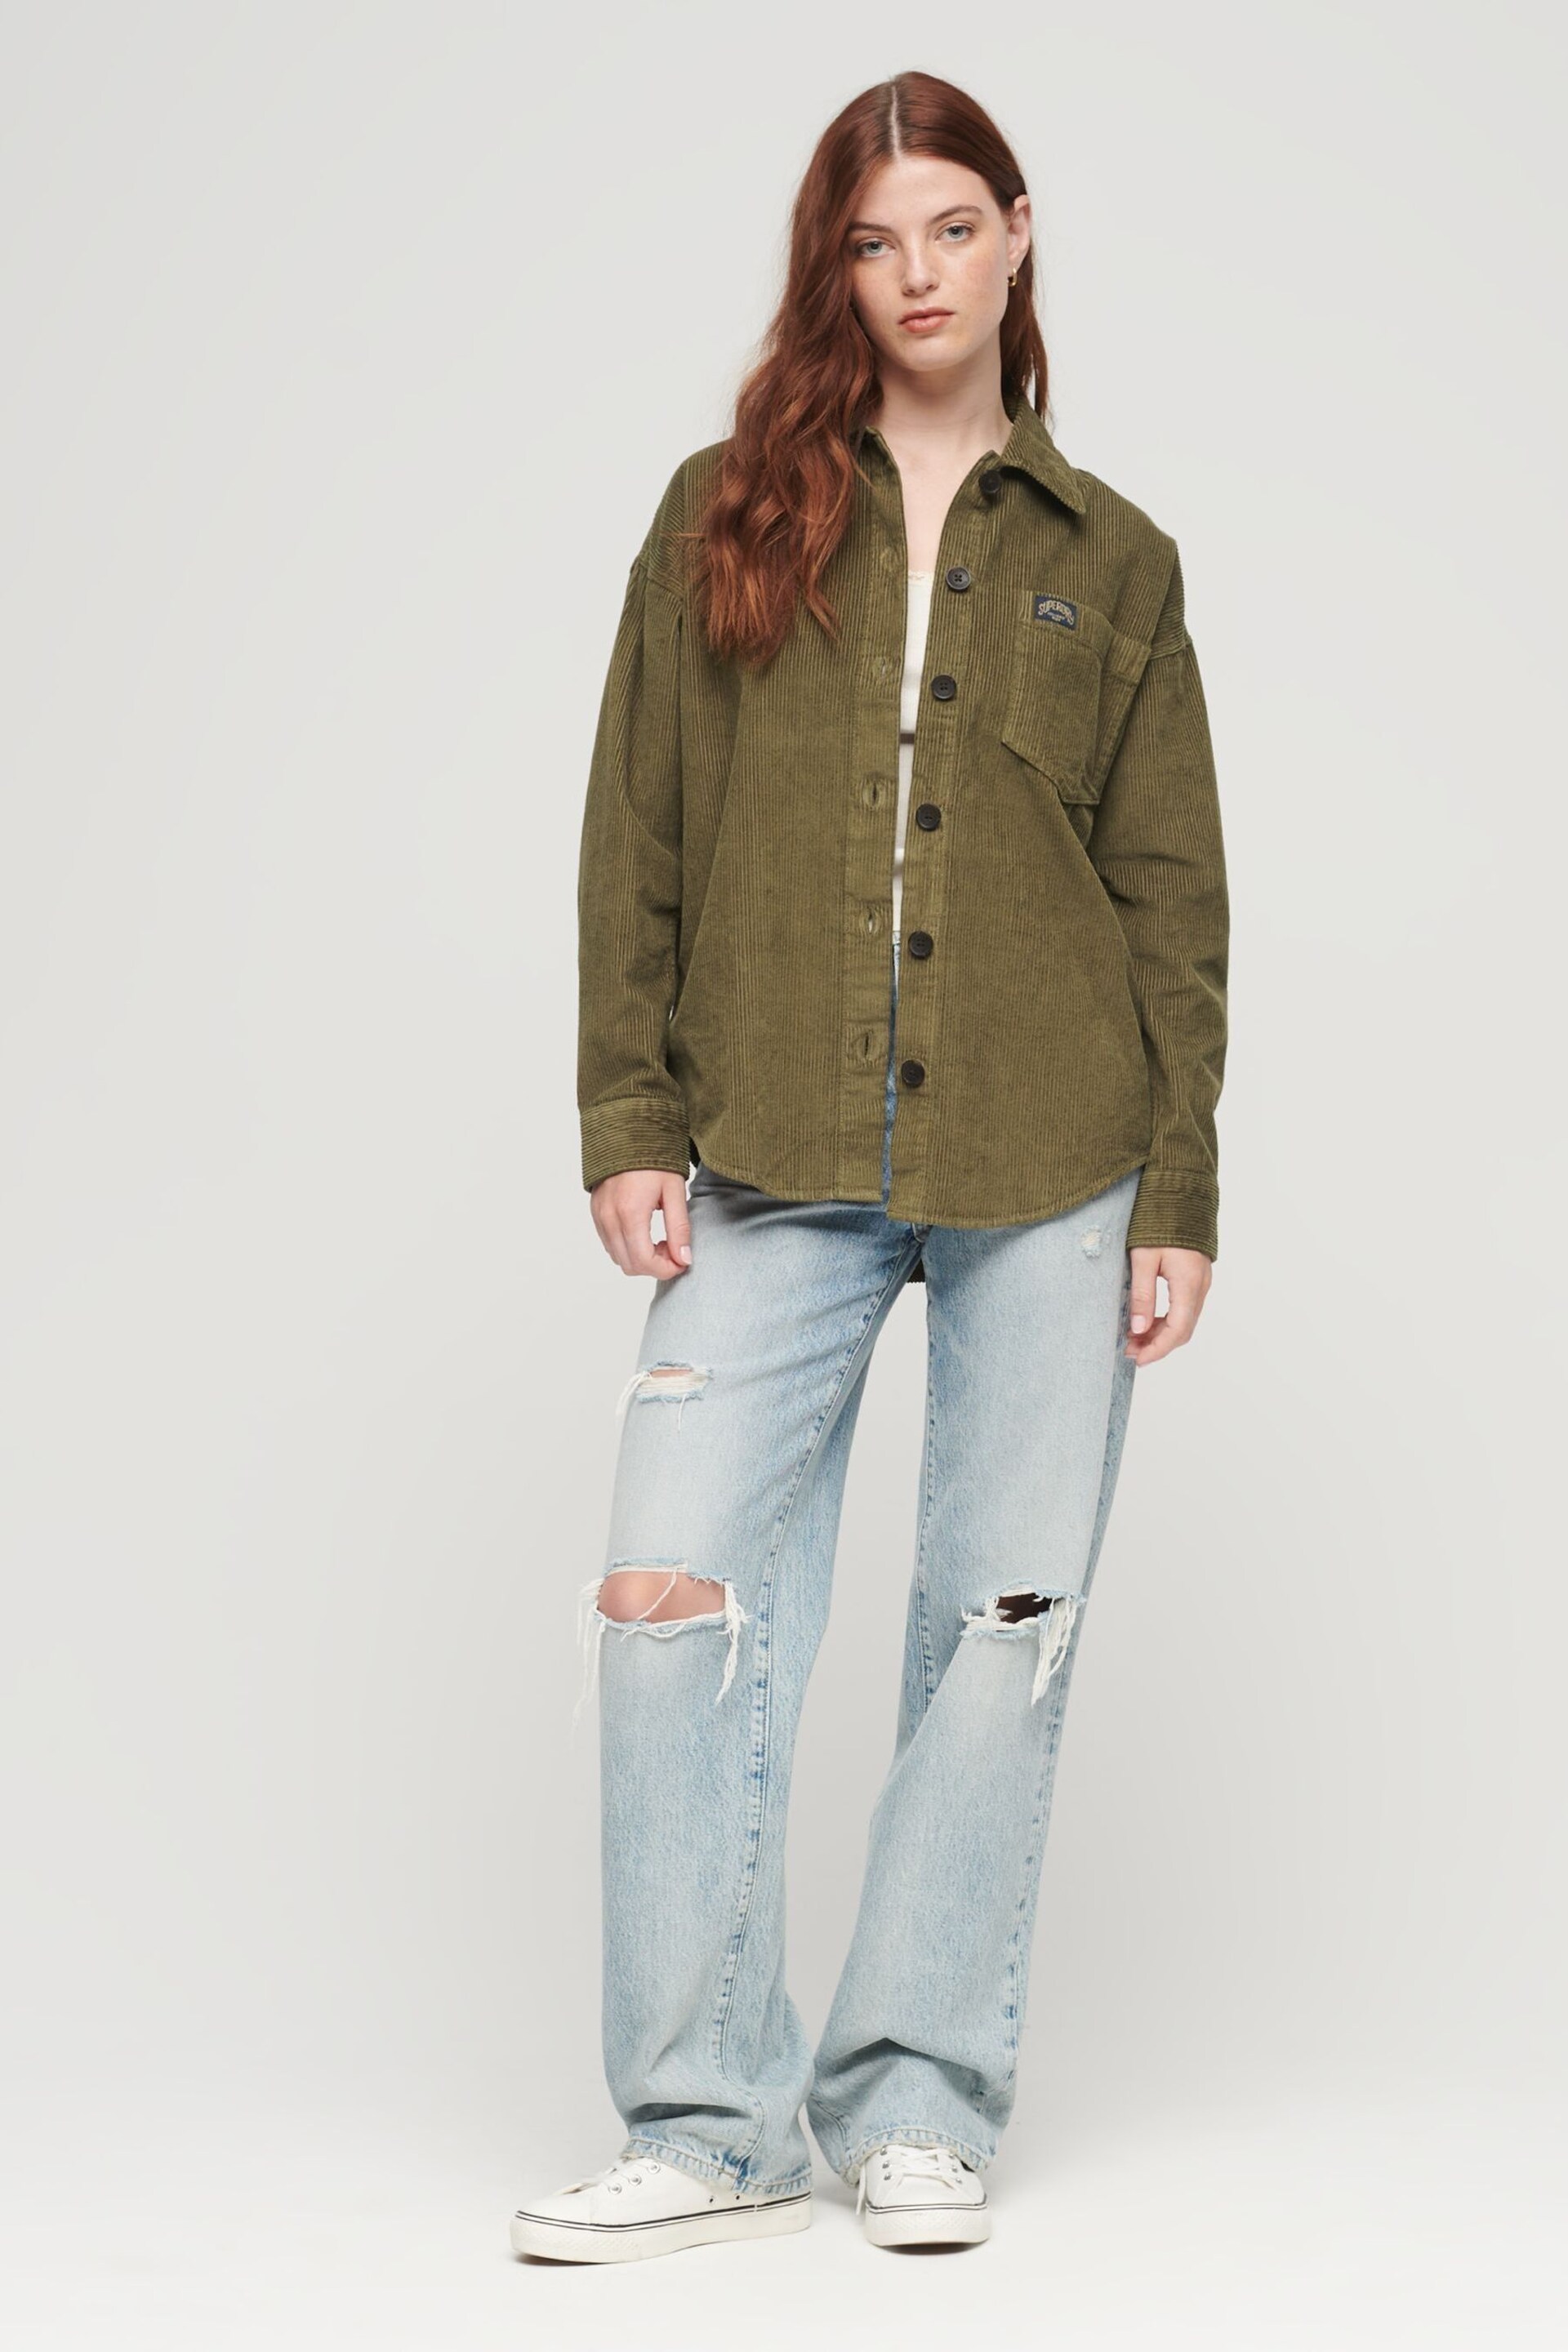 Superdry Green Chunky Cord Overshirt Jacket - Image 2 of 6